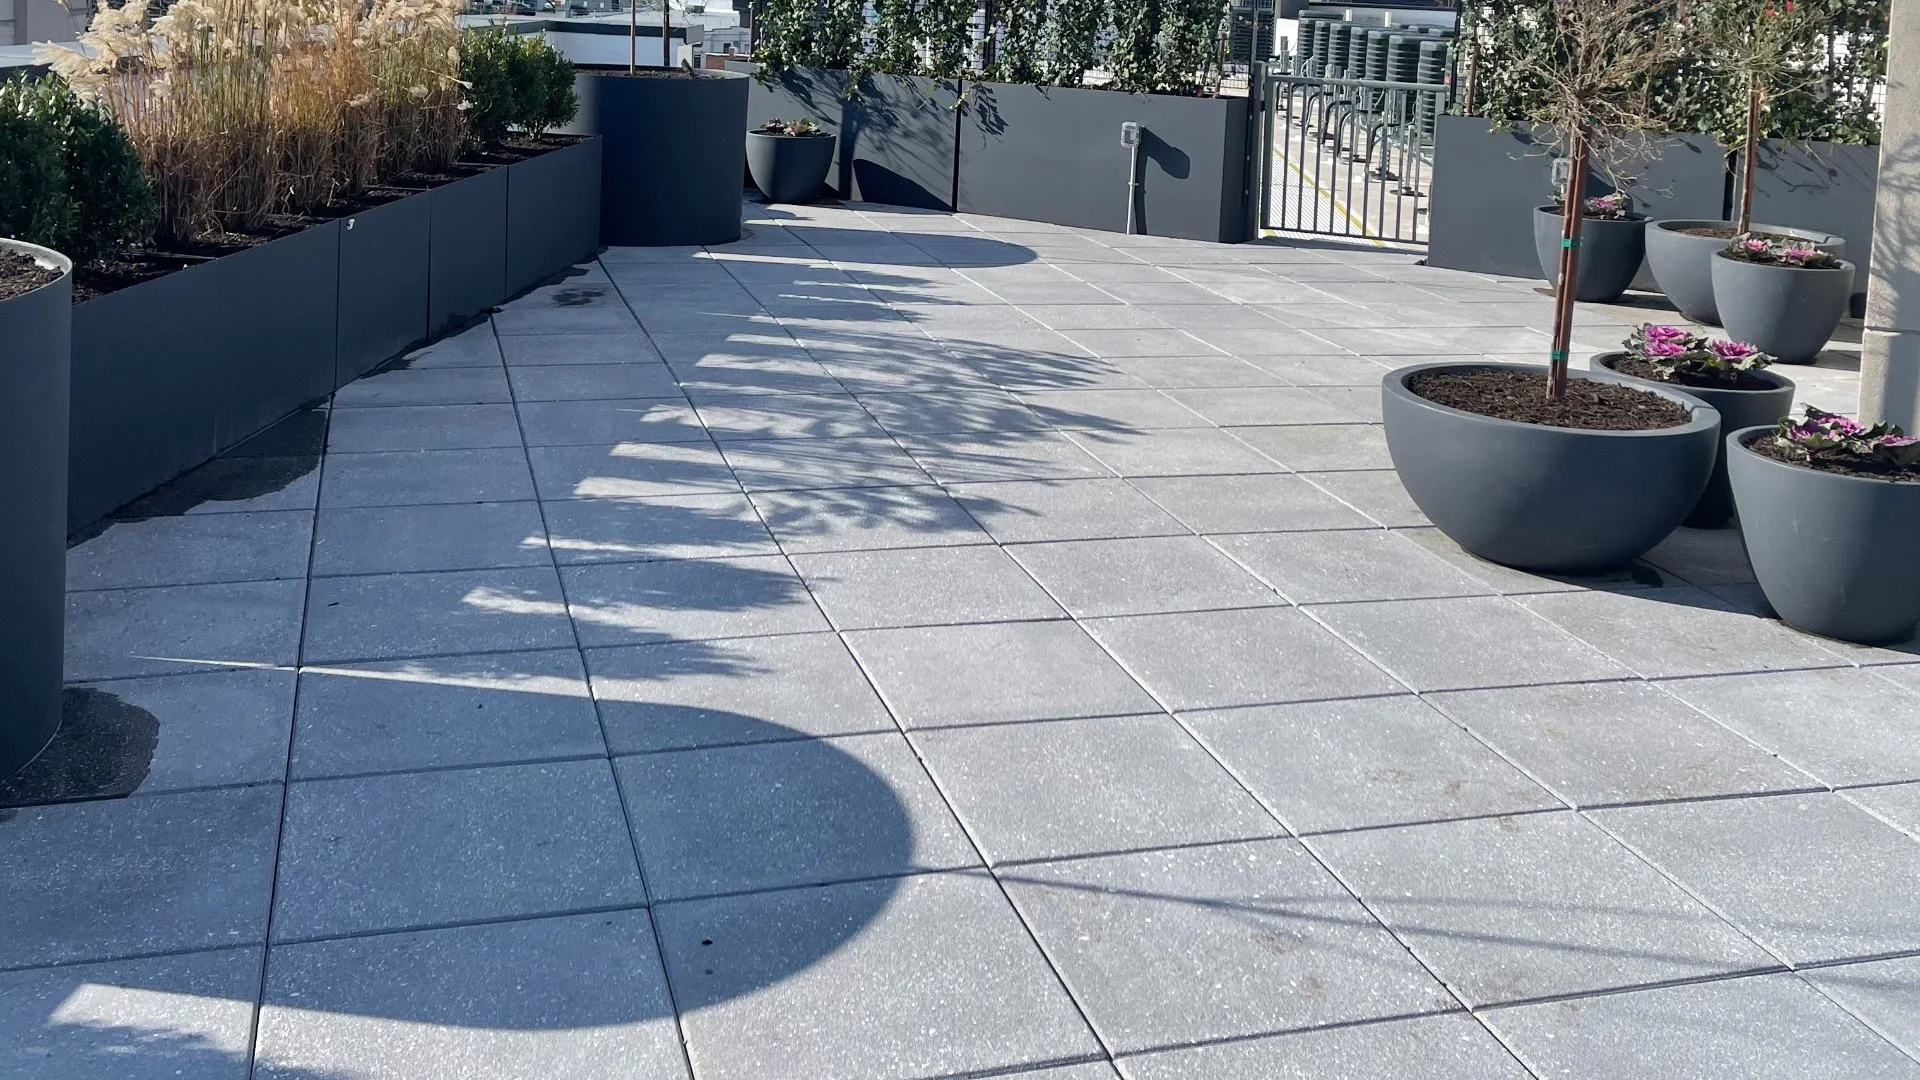 4 Reasons to Use Pavers for Your Commercial Patio Project